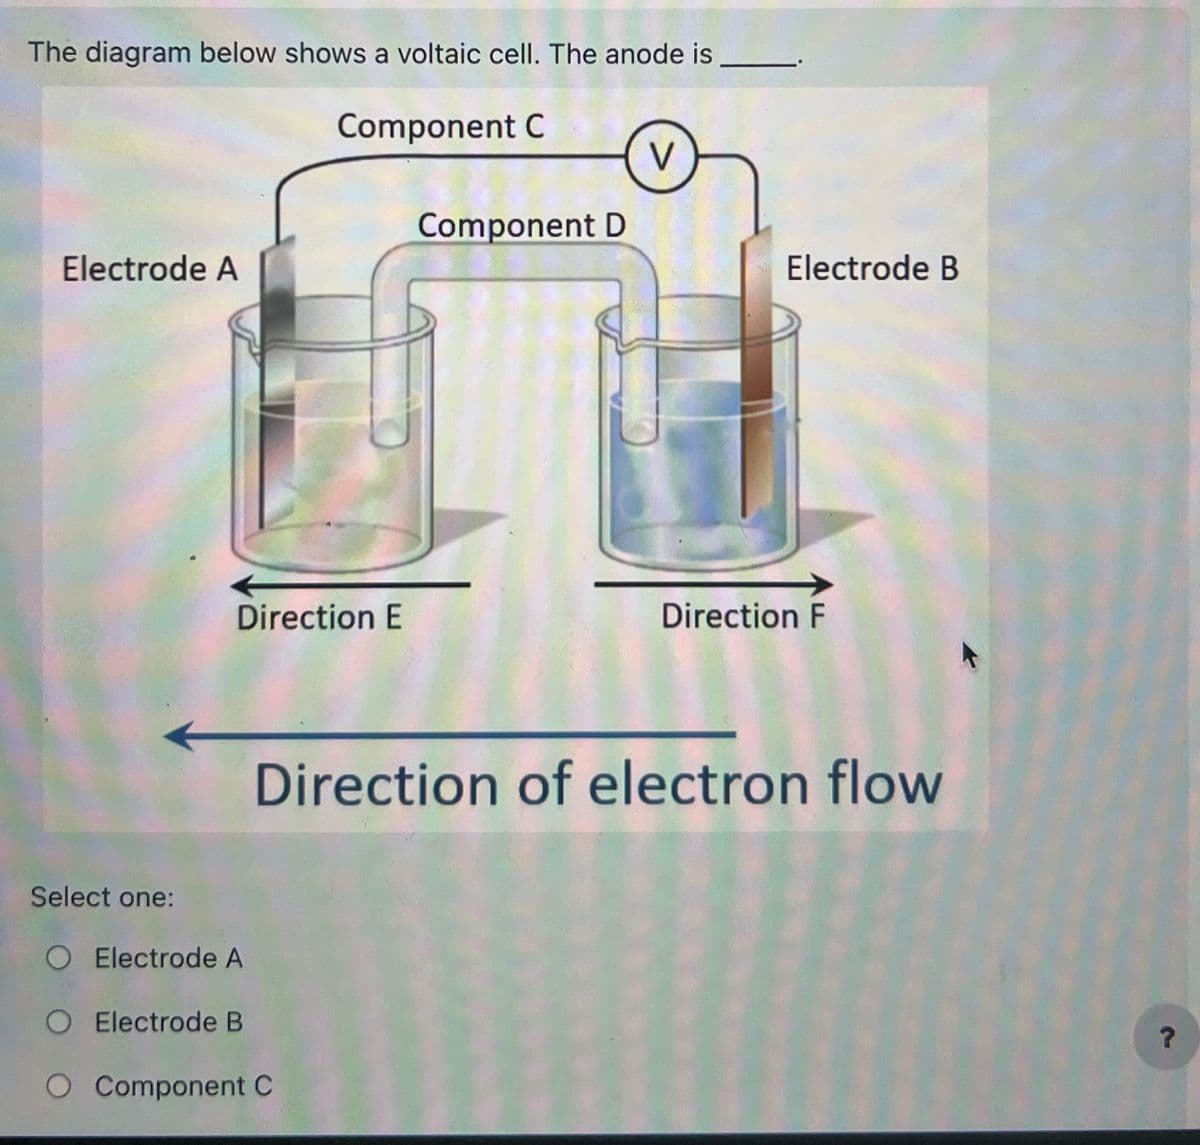 The diagram below shows a voltaic cell. The anode is
Electrode A
Component C
V
Component D
Direction E
Electrode B
Direction F
Direction of electron flow
Select one:
○ Electrode A
○ Electrode B
O Component C
?